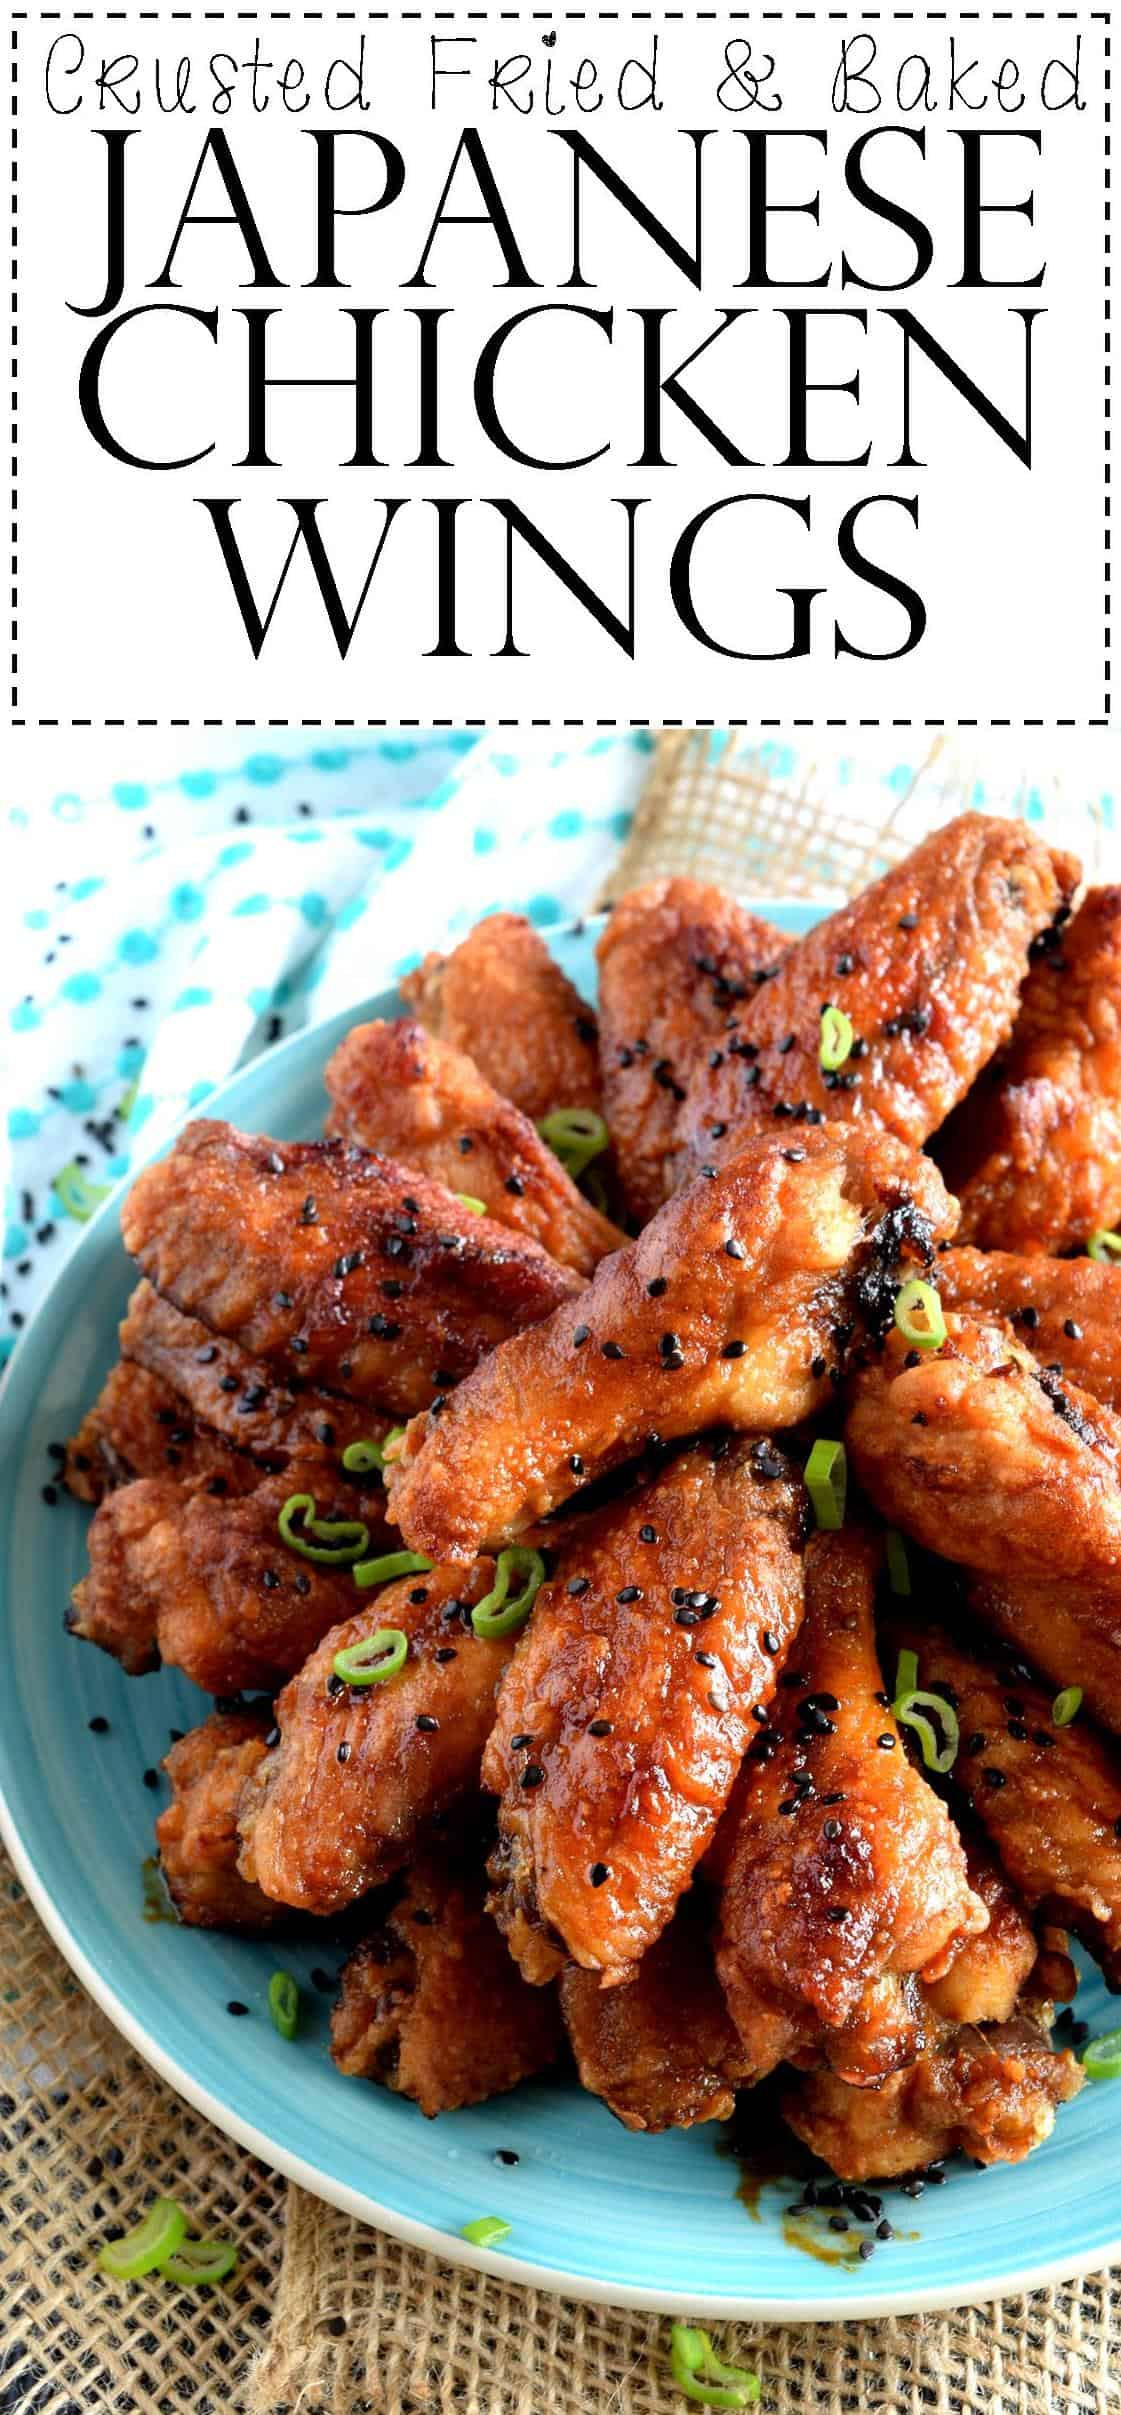 Fry Chicken Wings
 Crusted Fried and Baked Japanese Chicken Wings Lord